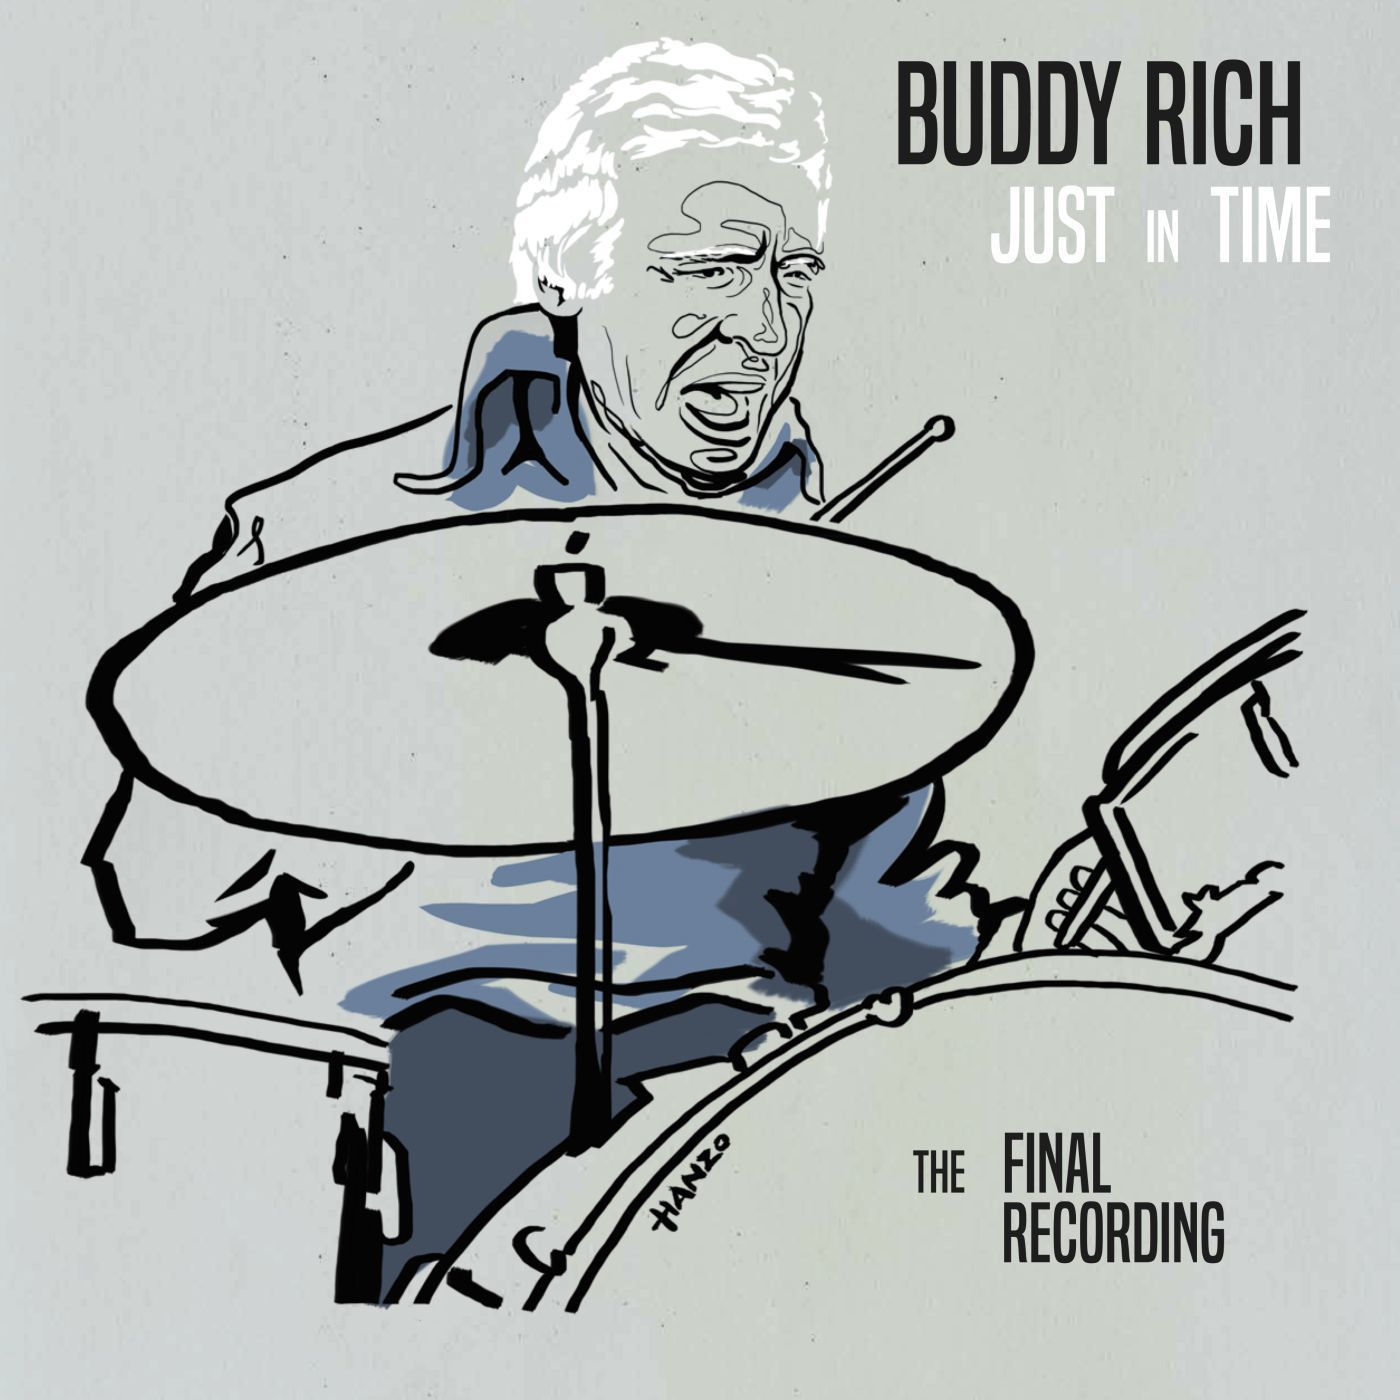 Buddy Rich – Just in Time: The Final Recording (2019) [FLAC 24bit/96kHz]